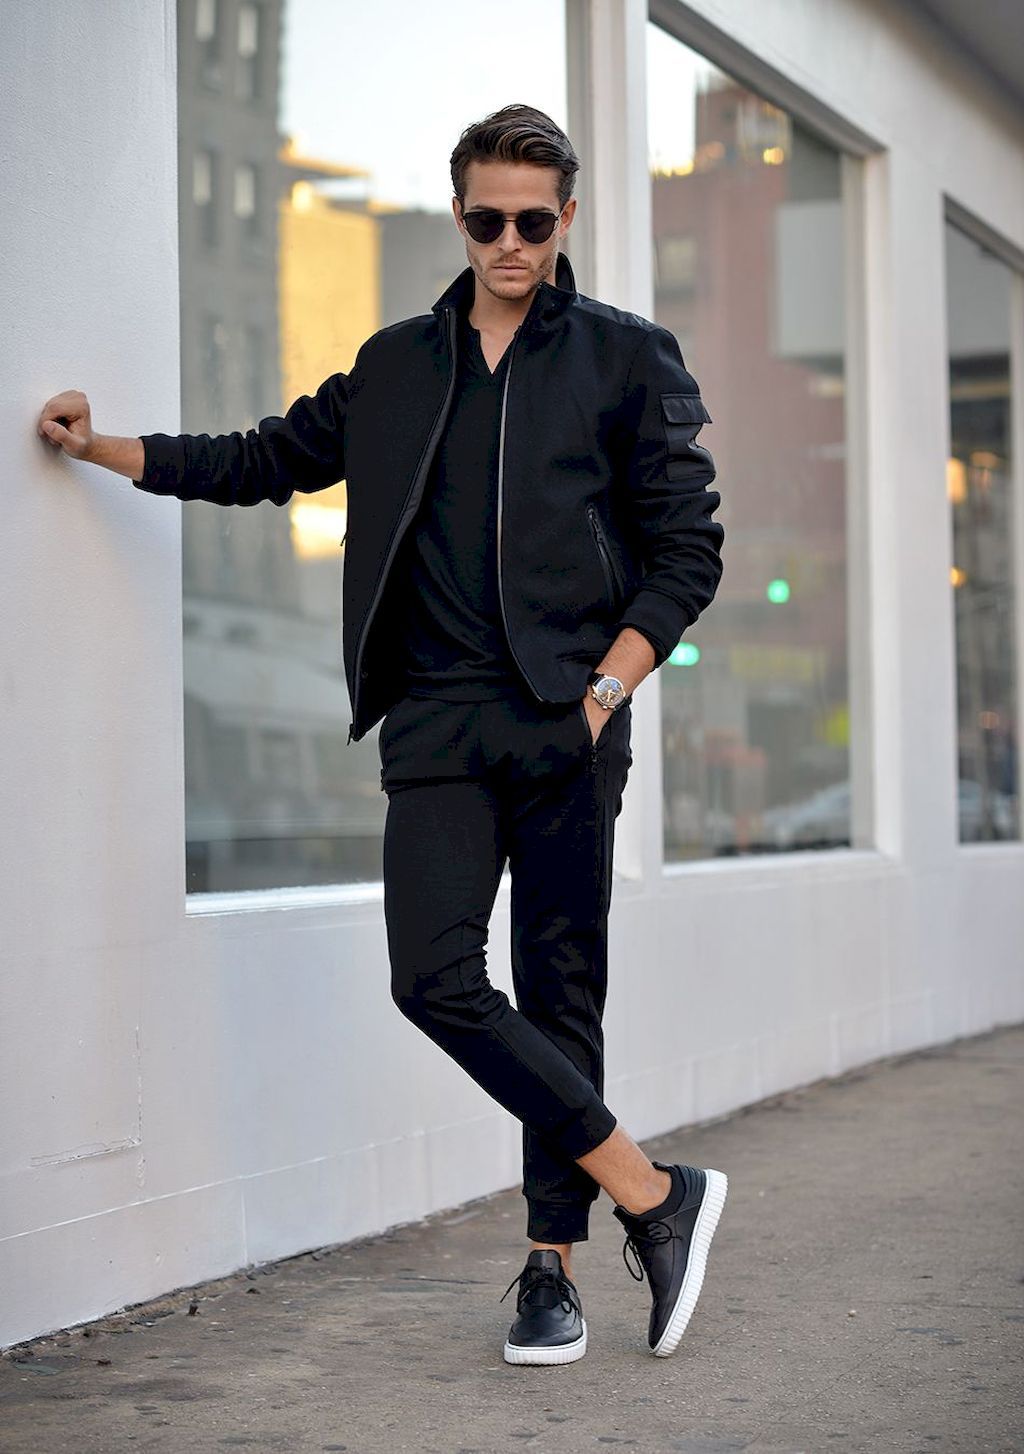 Best 30 Men Outfit Ideas With Bomber Jacket #bomber #Ideas #jacket #men  #Outfit